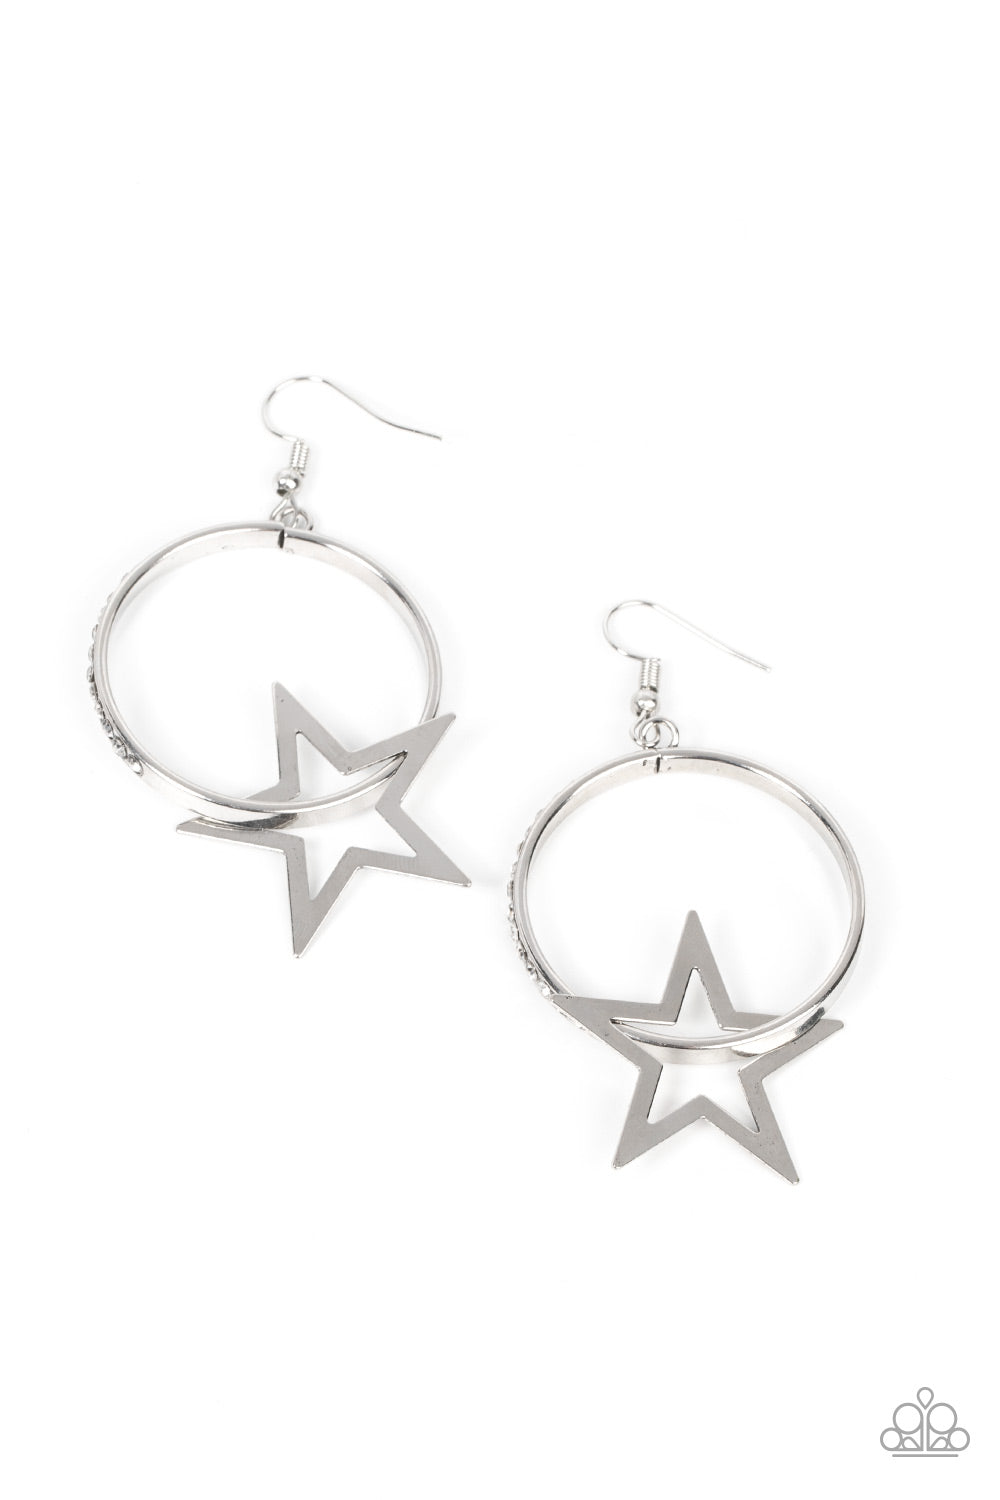 Superstar Showcase - Silver and White Earrings - Paparazzi Accessories - A flat silver star glides along a silver hoop, resulting in a stellar fashion. The front of the silver hoop is encrusted in glassy white rhinestones for a glitzy finish.